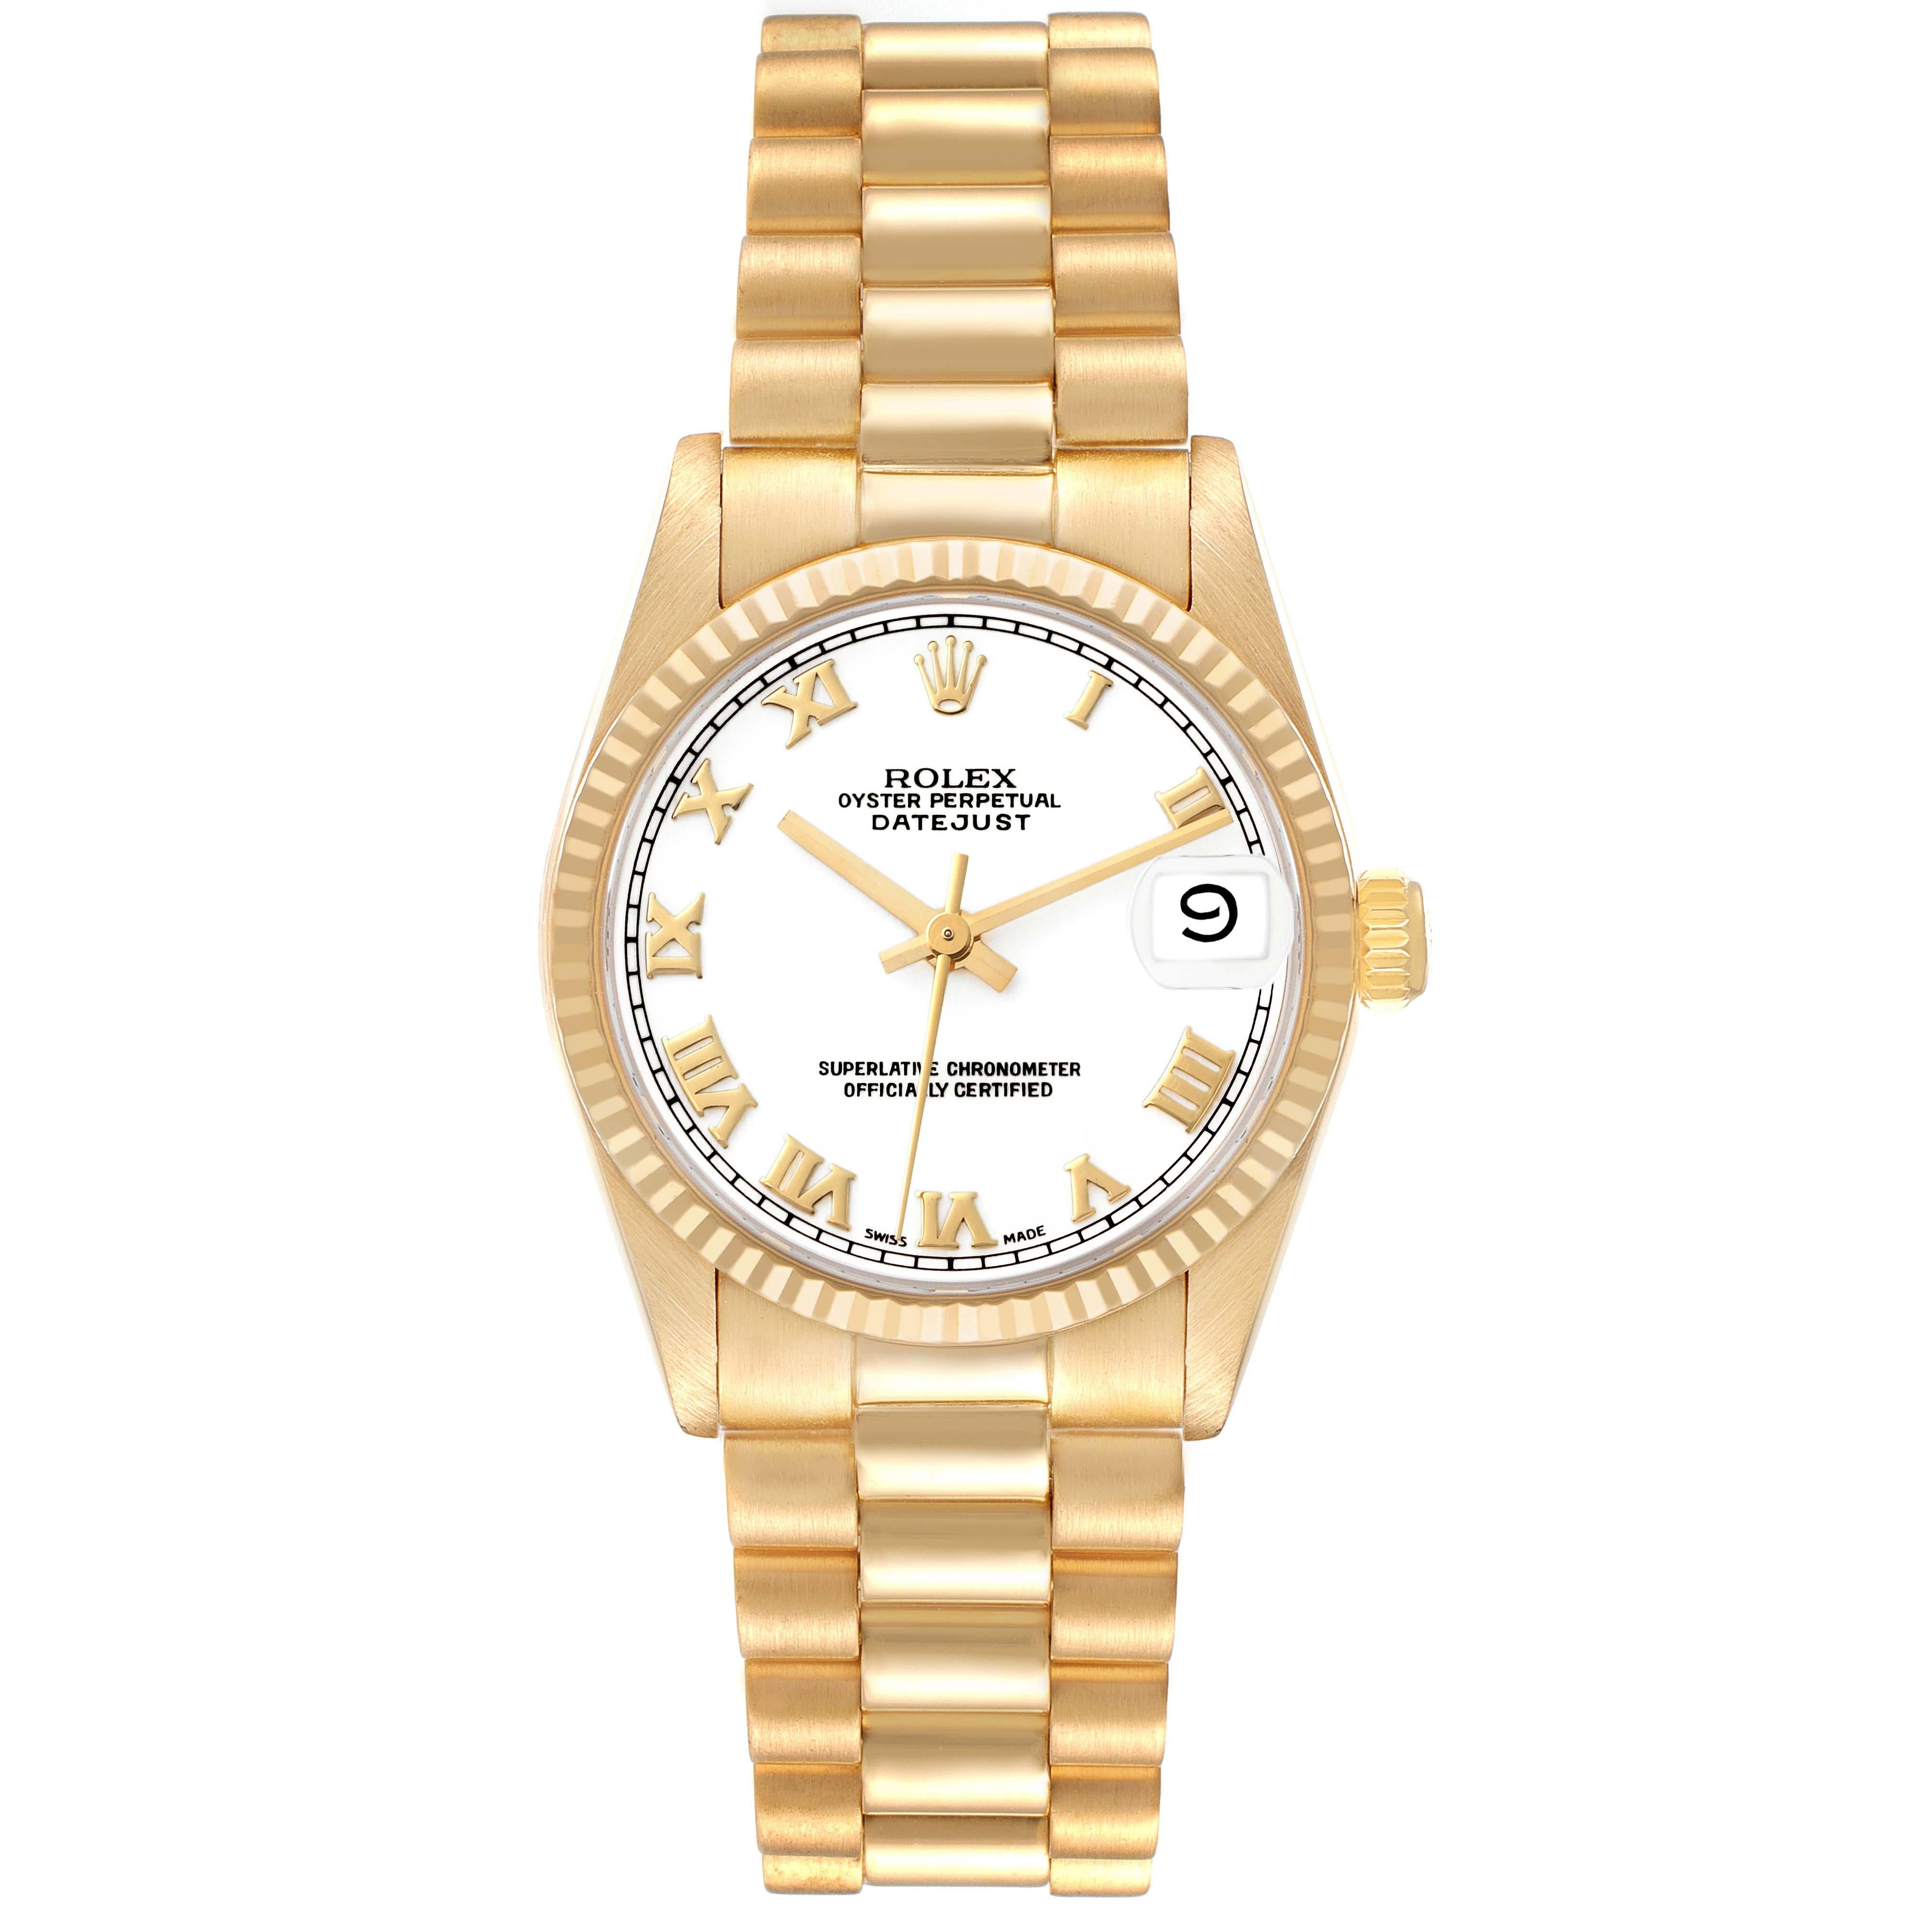 Rolex President Datejust Midsize White Dial Yellow Gold Ladies Watch 68278. Officially certified chronometer automatic self-winding movement. 18k yellow gold oyster case 31.0 mm in diameter. Rolex logo on the crown. 18k yellow gold fluted bezel.